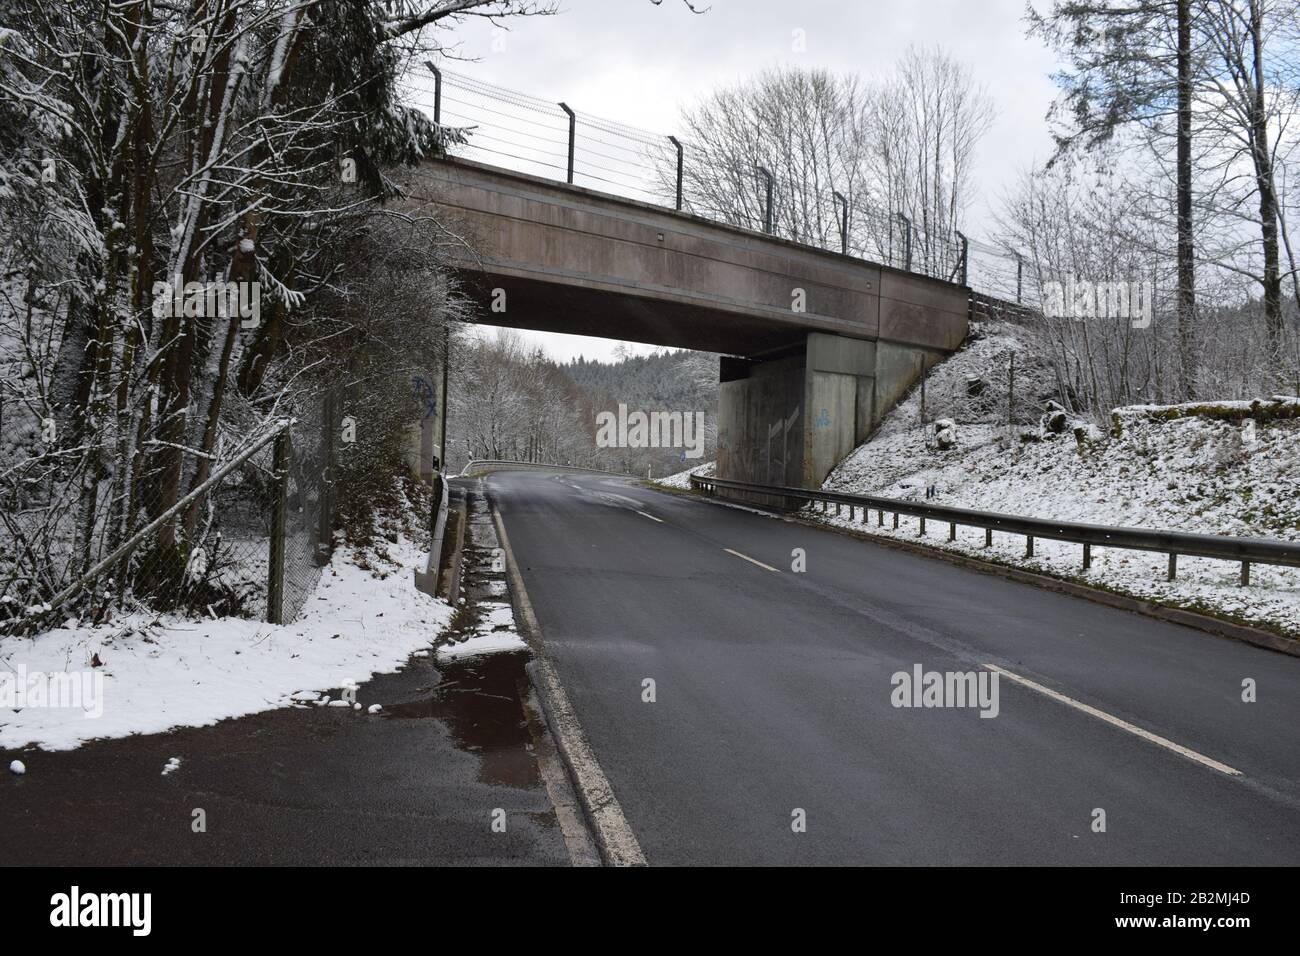 Snow on Hocheichen, Nürburgring Nordschleife 2020 in February Stock Photo